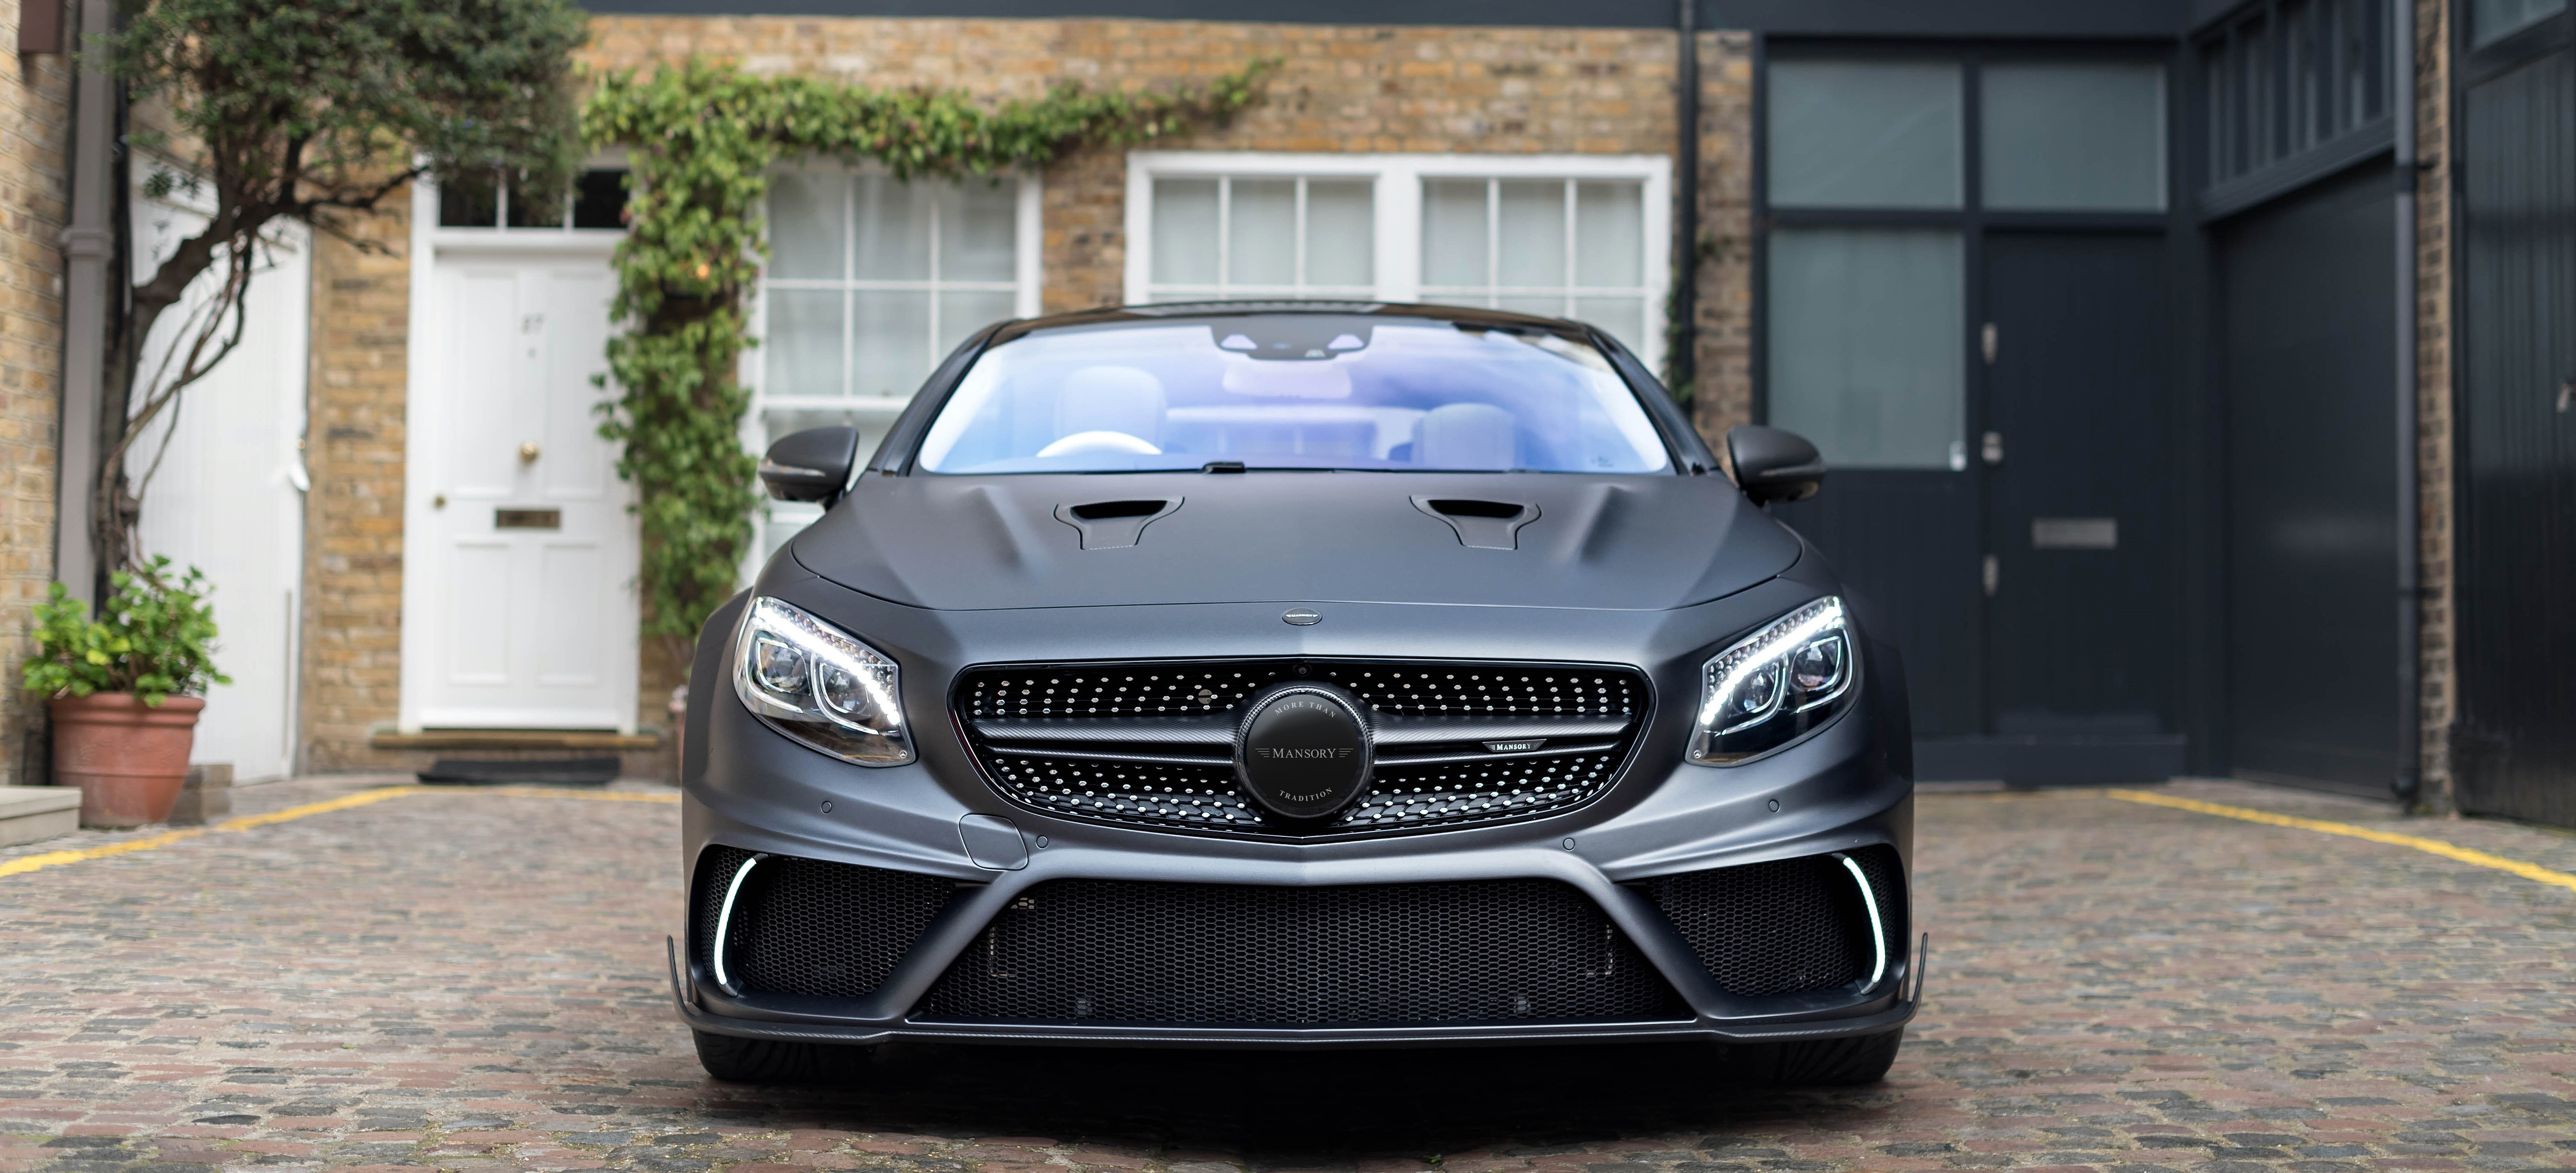 mansory_mercedes-benz_s-coupe_wide_black_edition_15.jpg